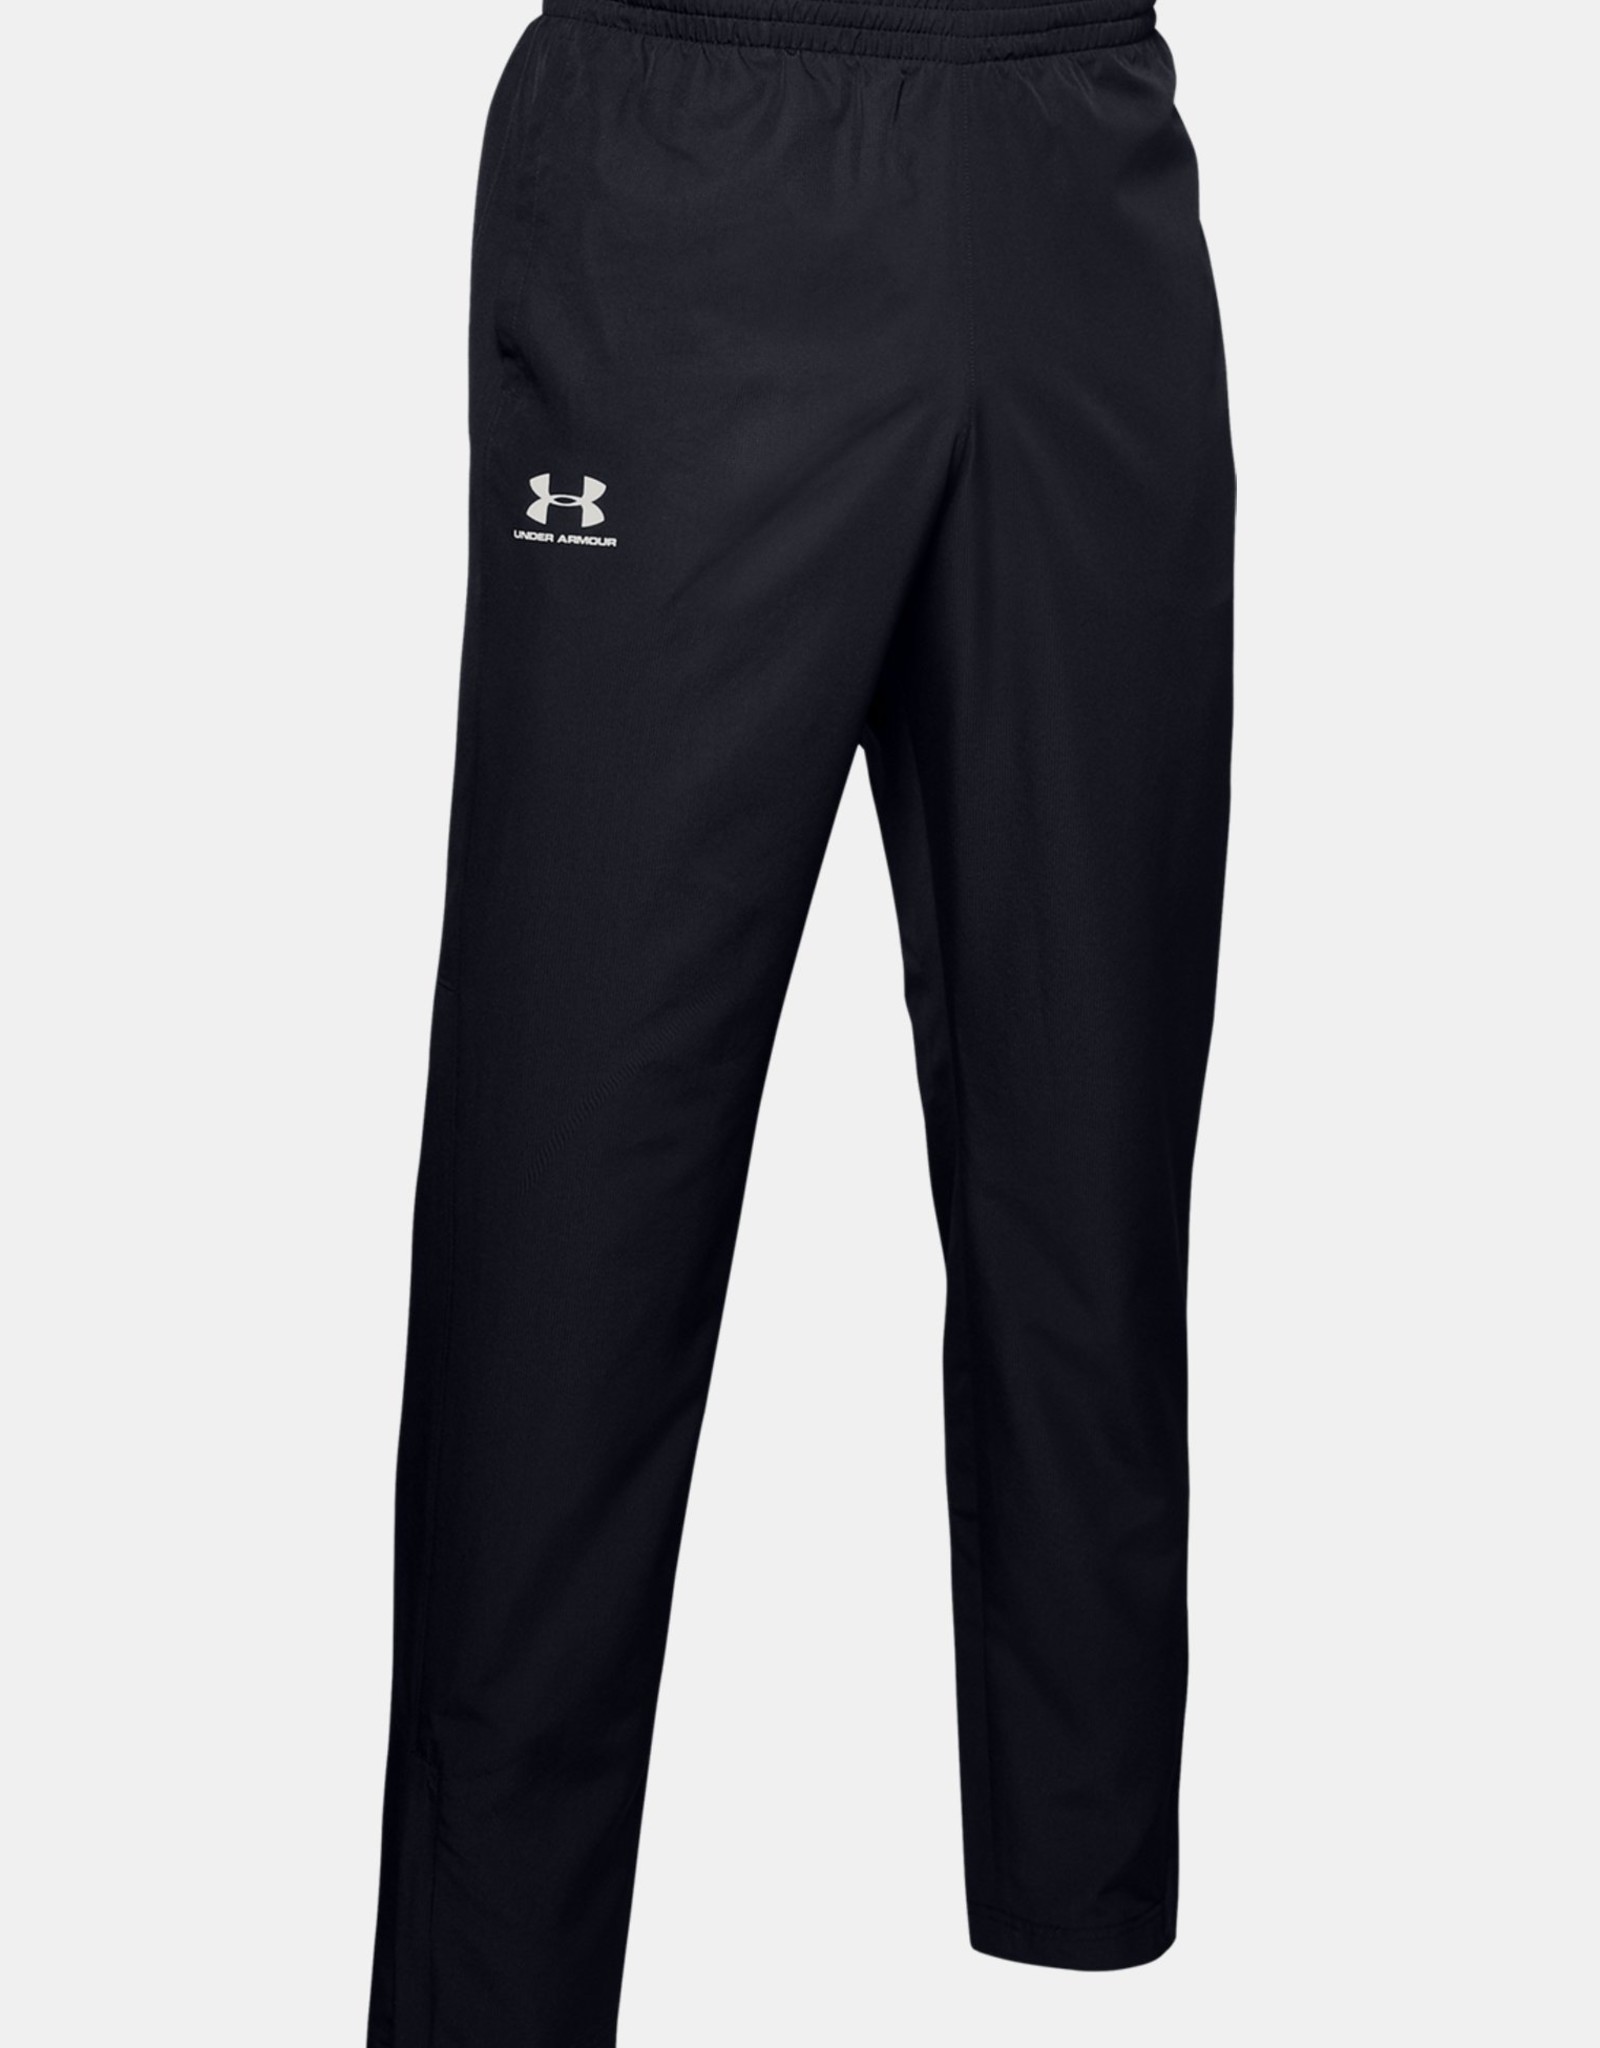 Under Armour Vital Woven Pants Black 1352031-001 - Free Shipping